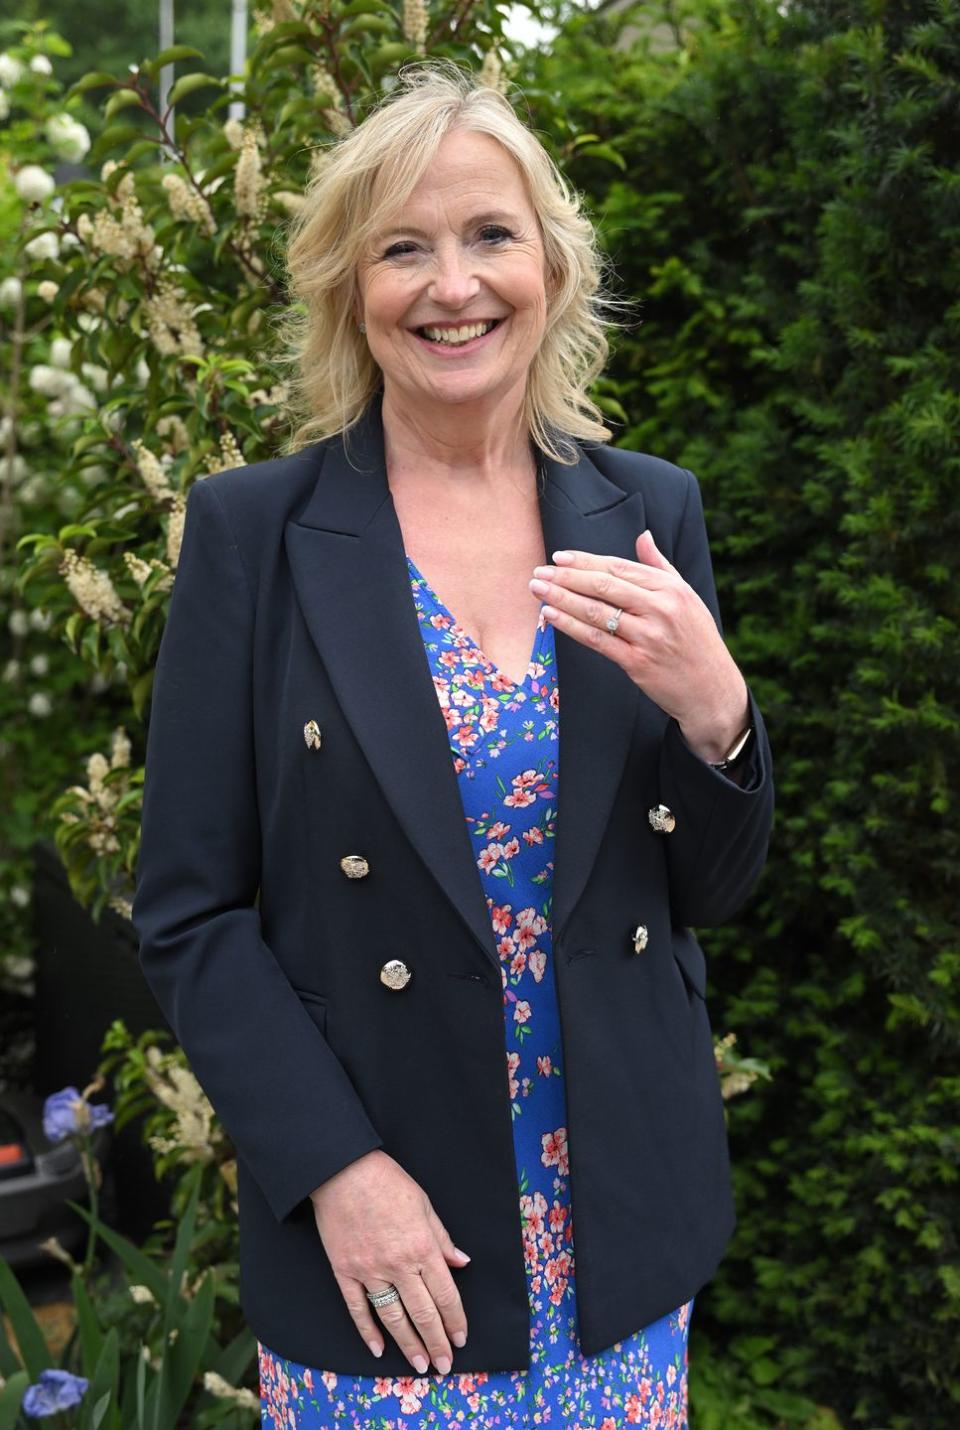 carol kirkwood smiles and holds up her hand to show photographers her engagement ring as she stands in front of a floral display